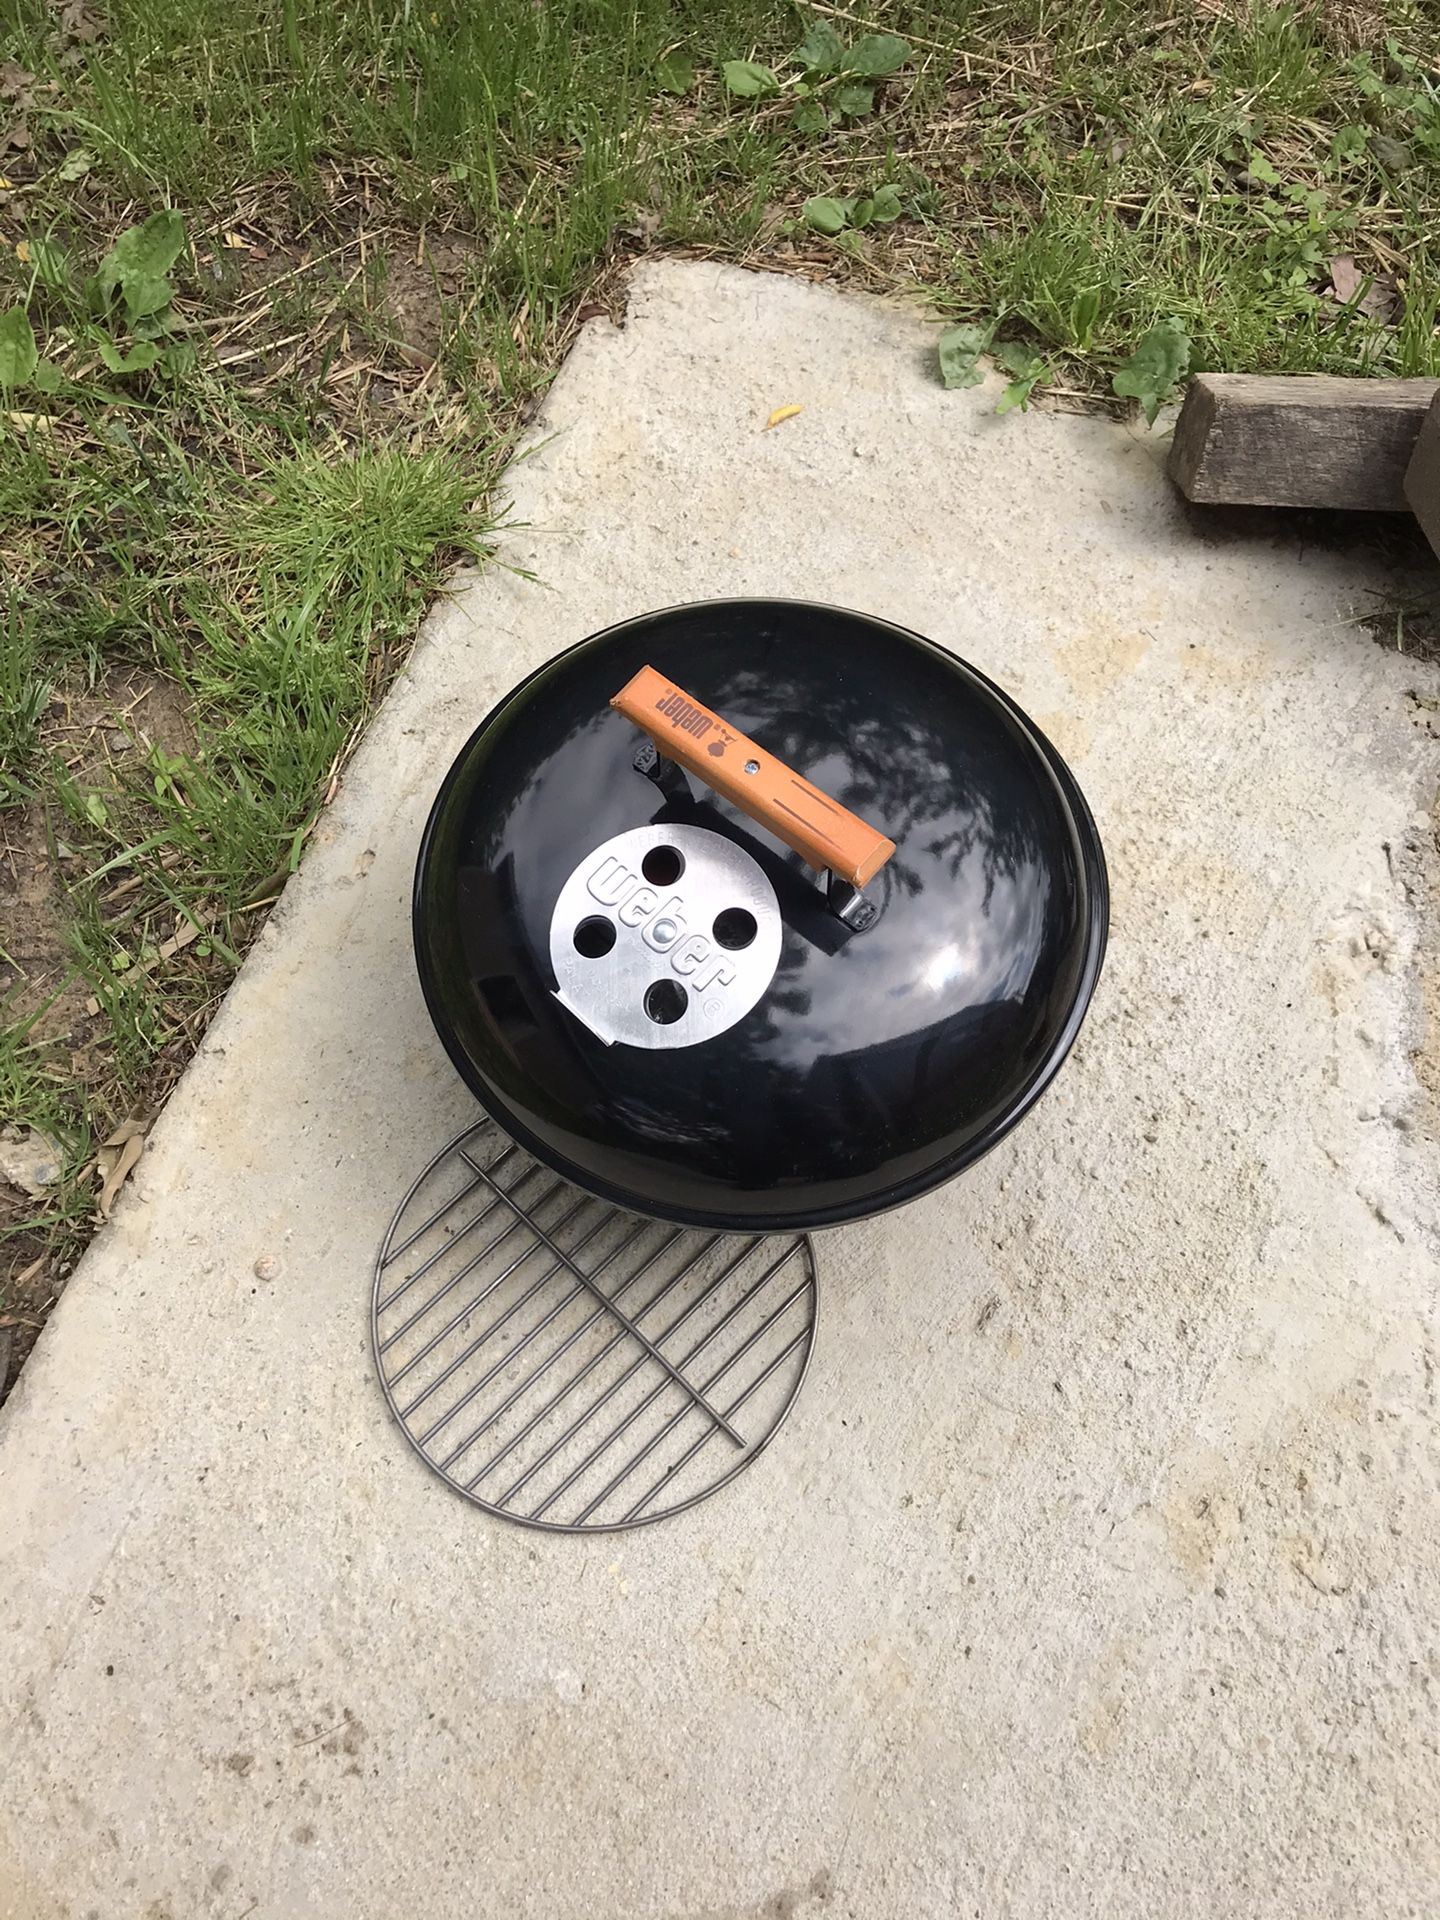 12” grill New $15